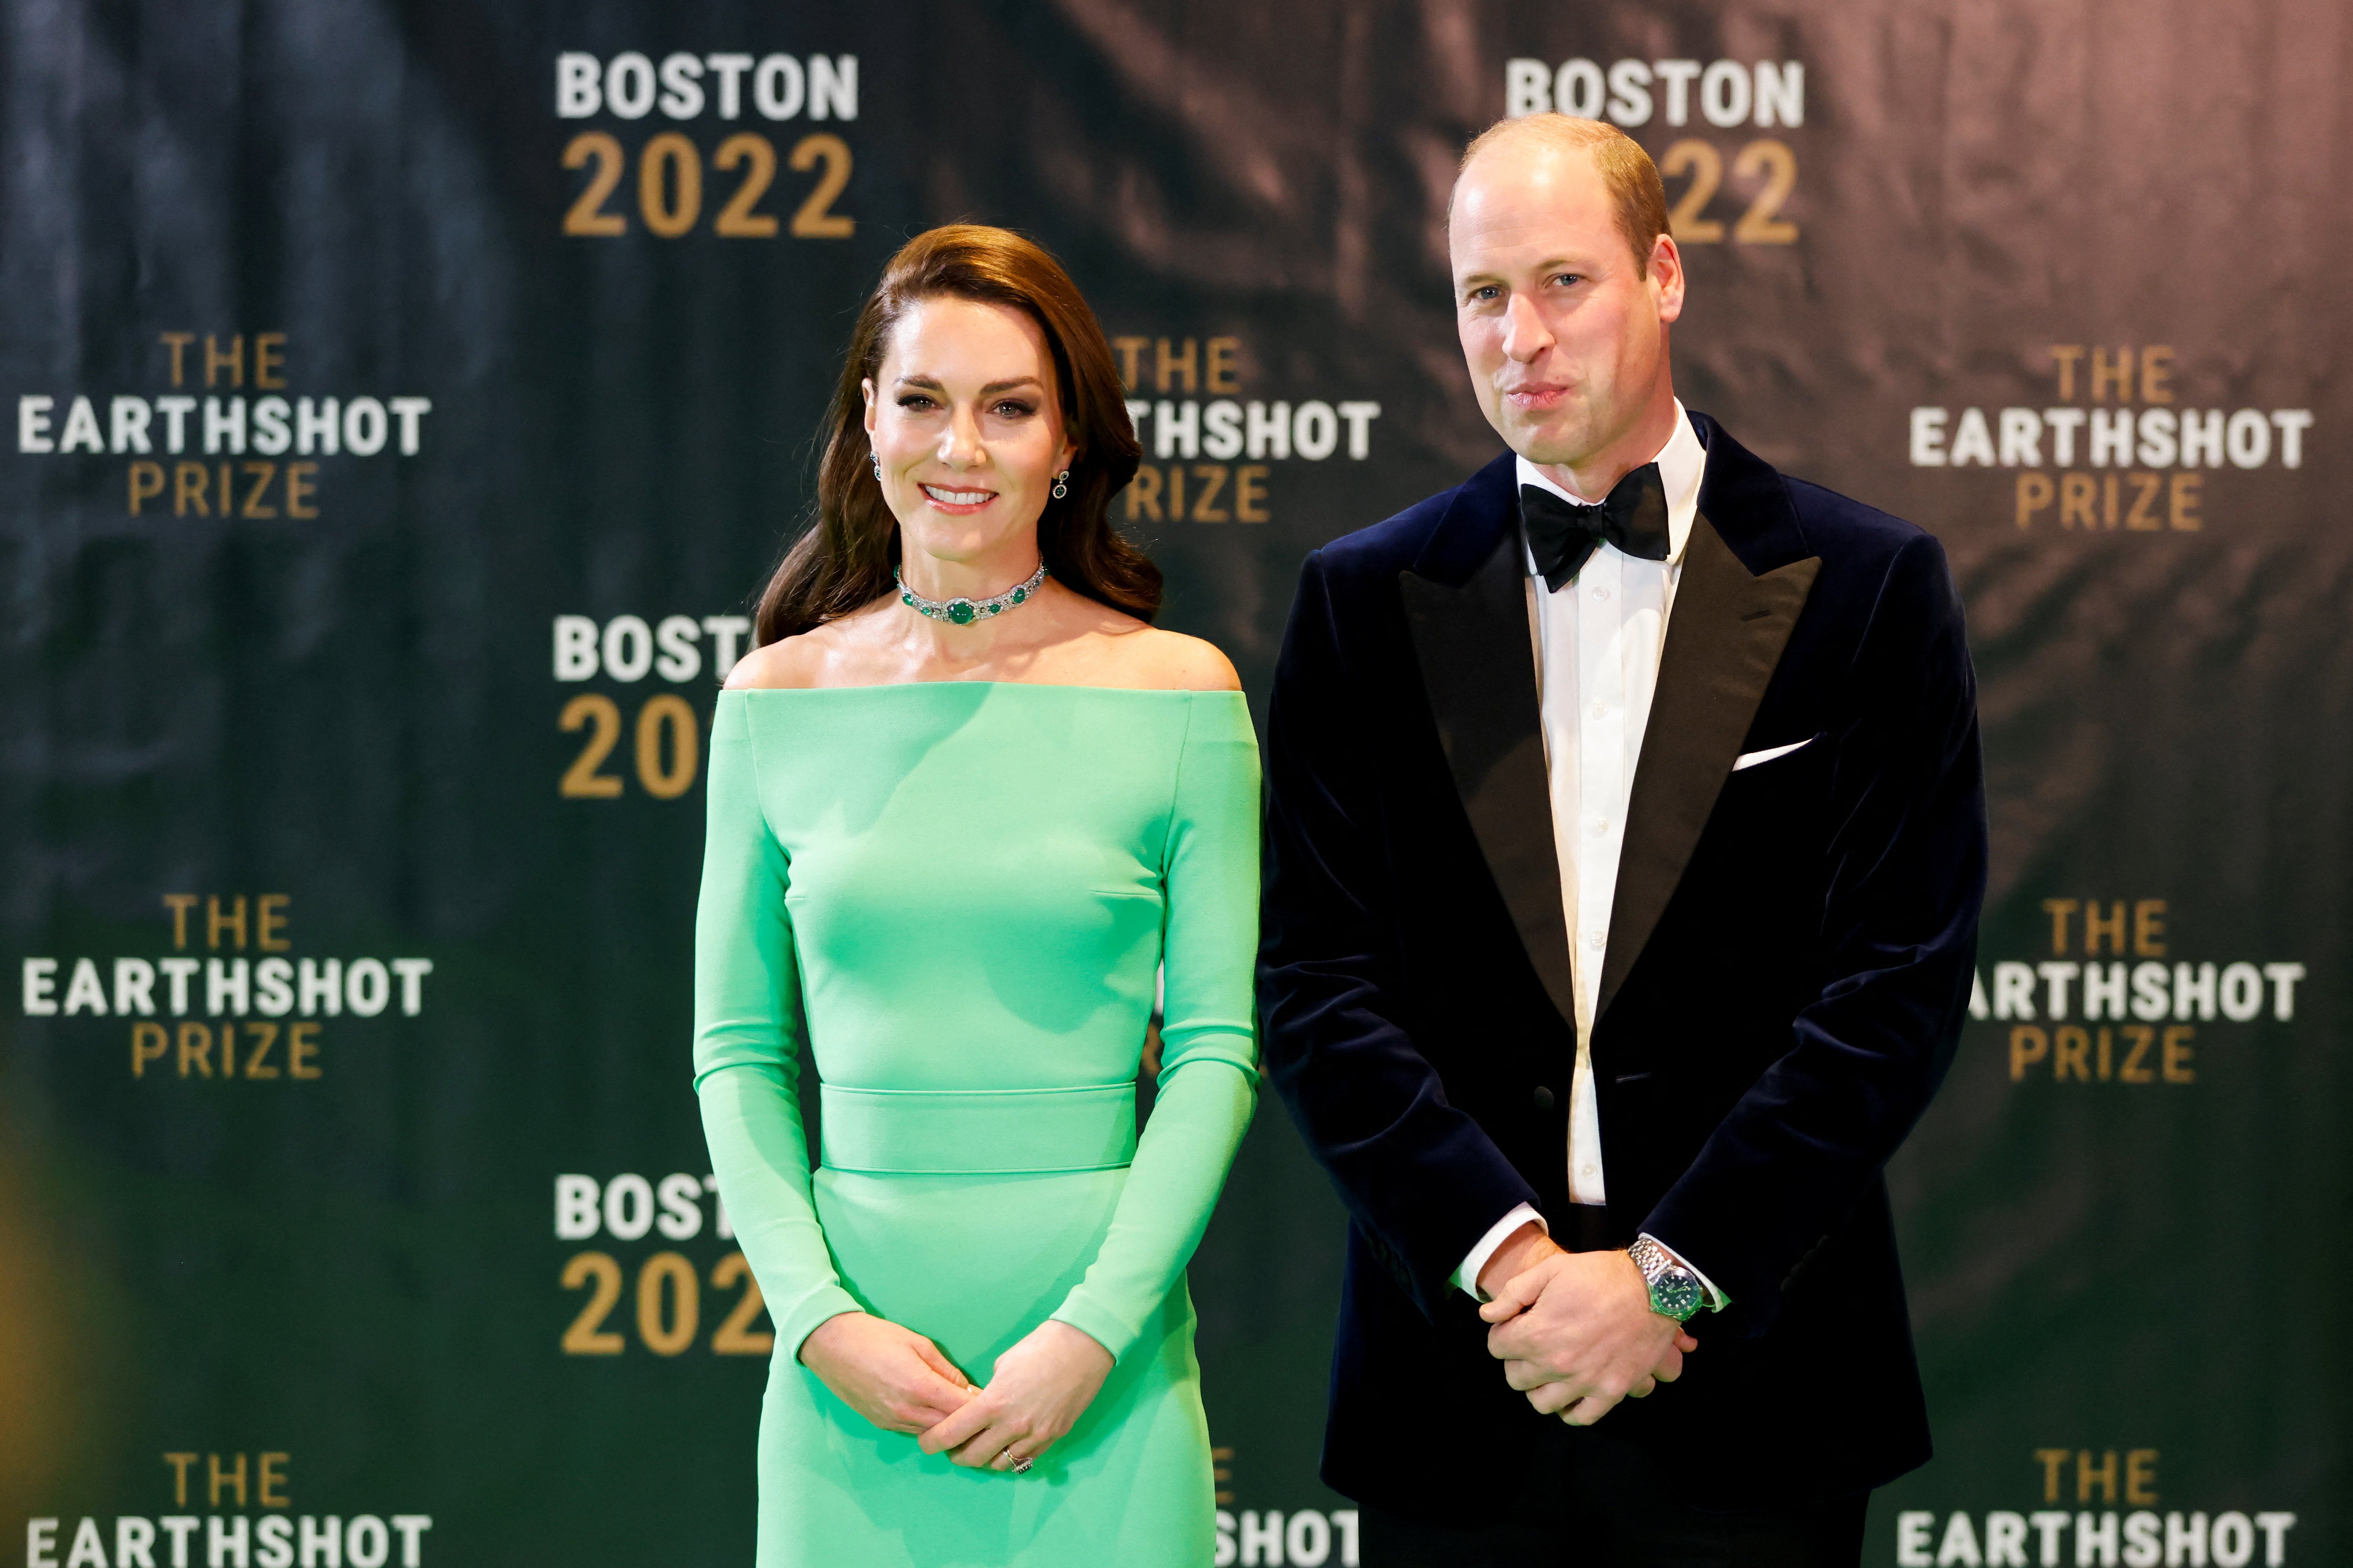 William and Kate on the green carpet in Boston, Massachusetts